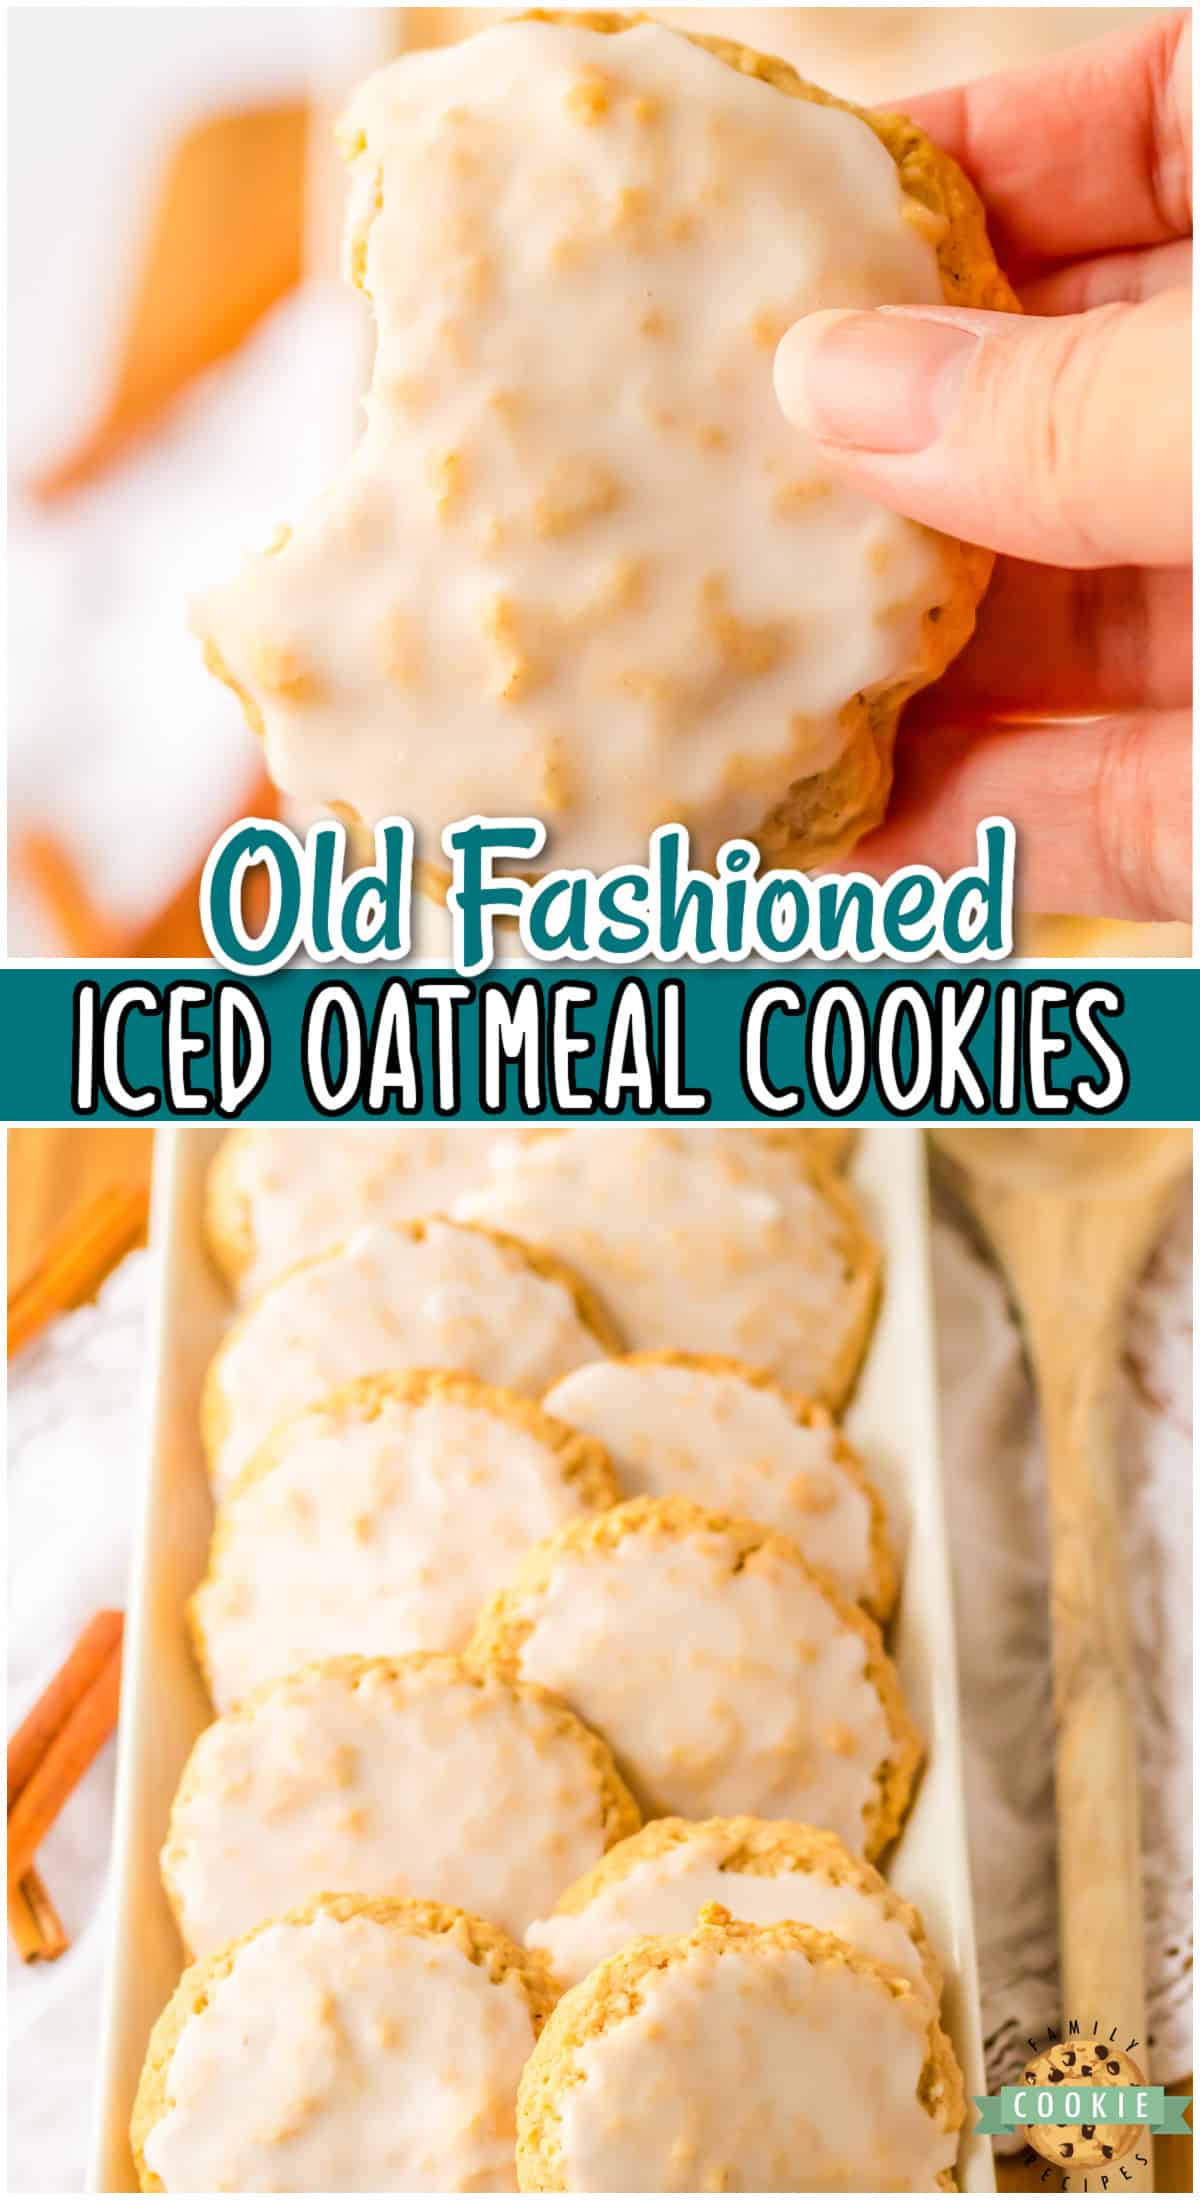 Soft & Chewy Iced Oatmeal Cookies are made with classic ingredients like oats, butter & brown sugar, then baked and topped with a simple sweet icing. Just like the classic old fashioned oatmeal cookies everyone loves!